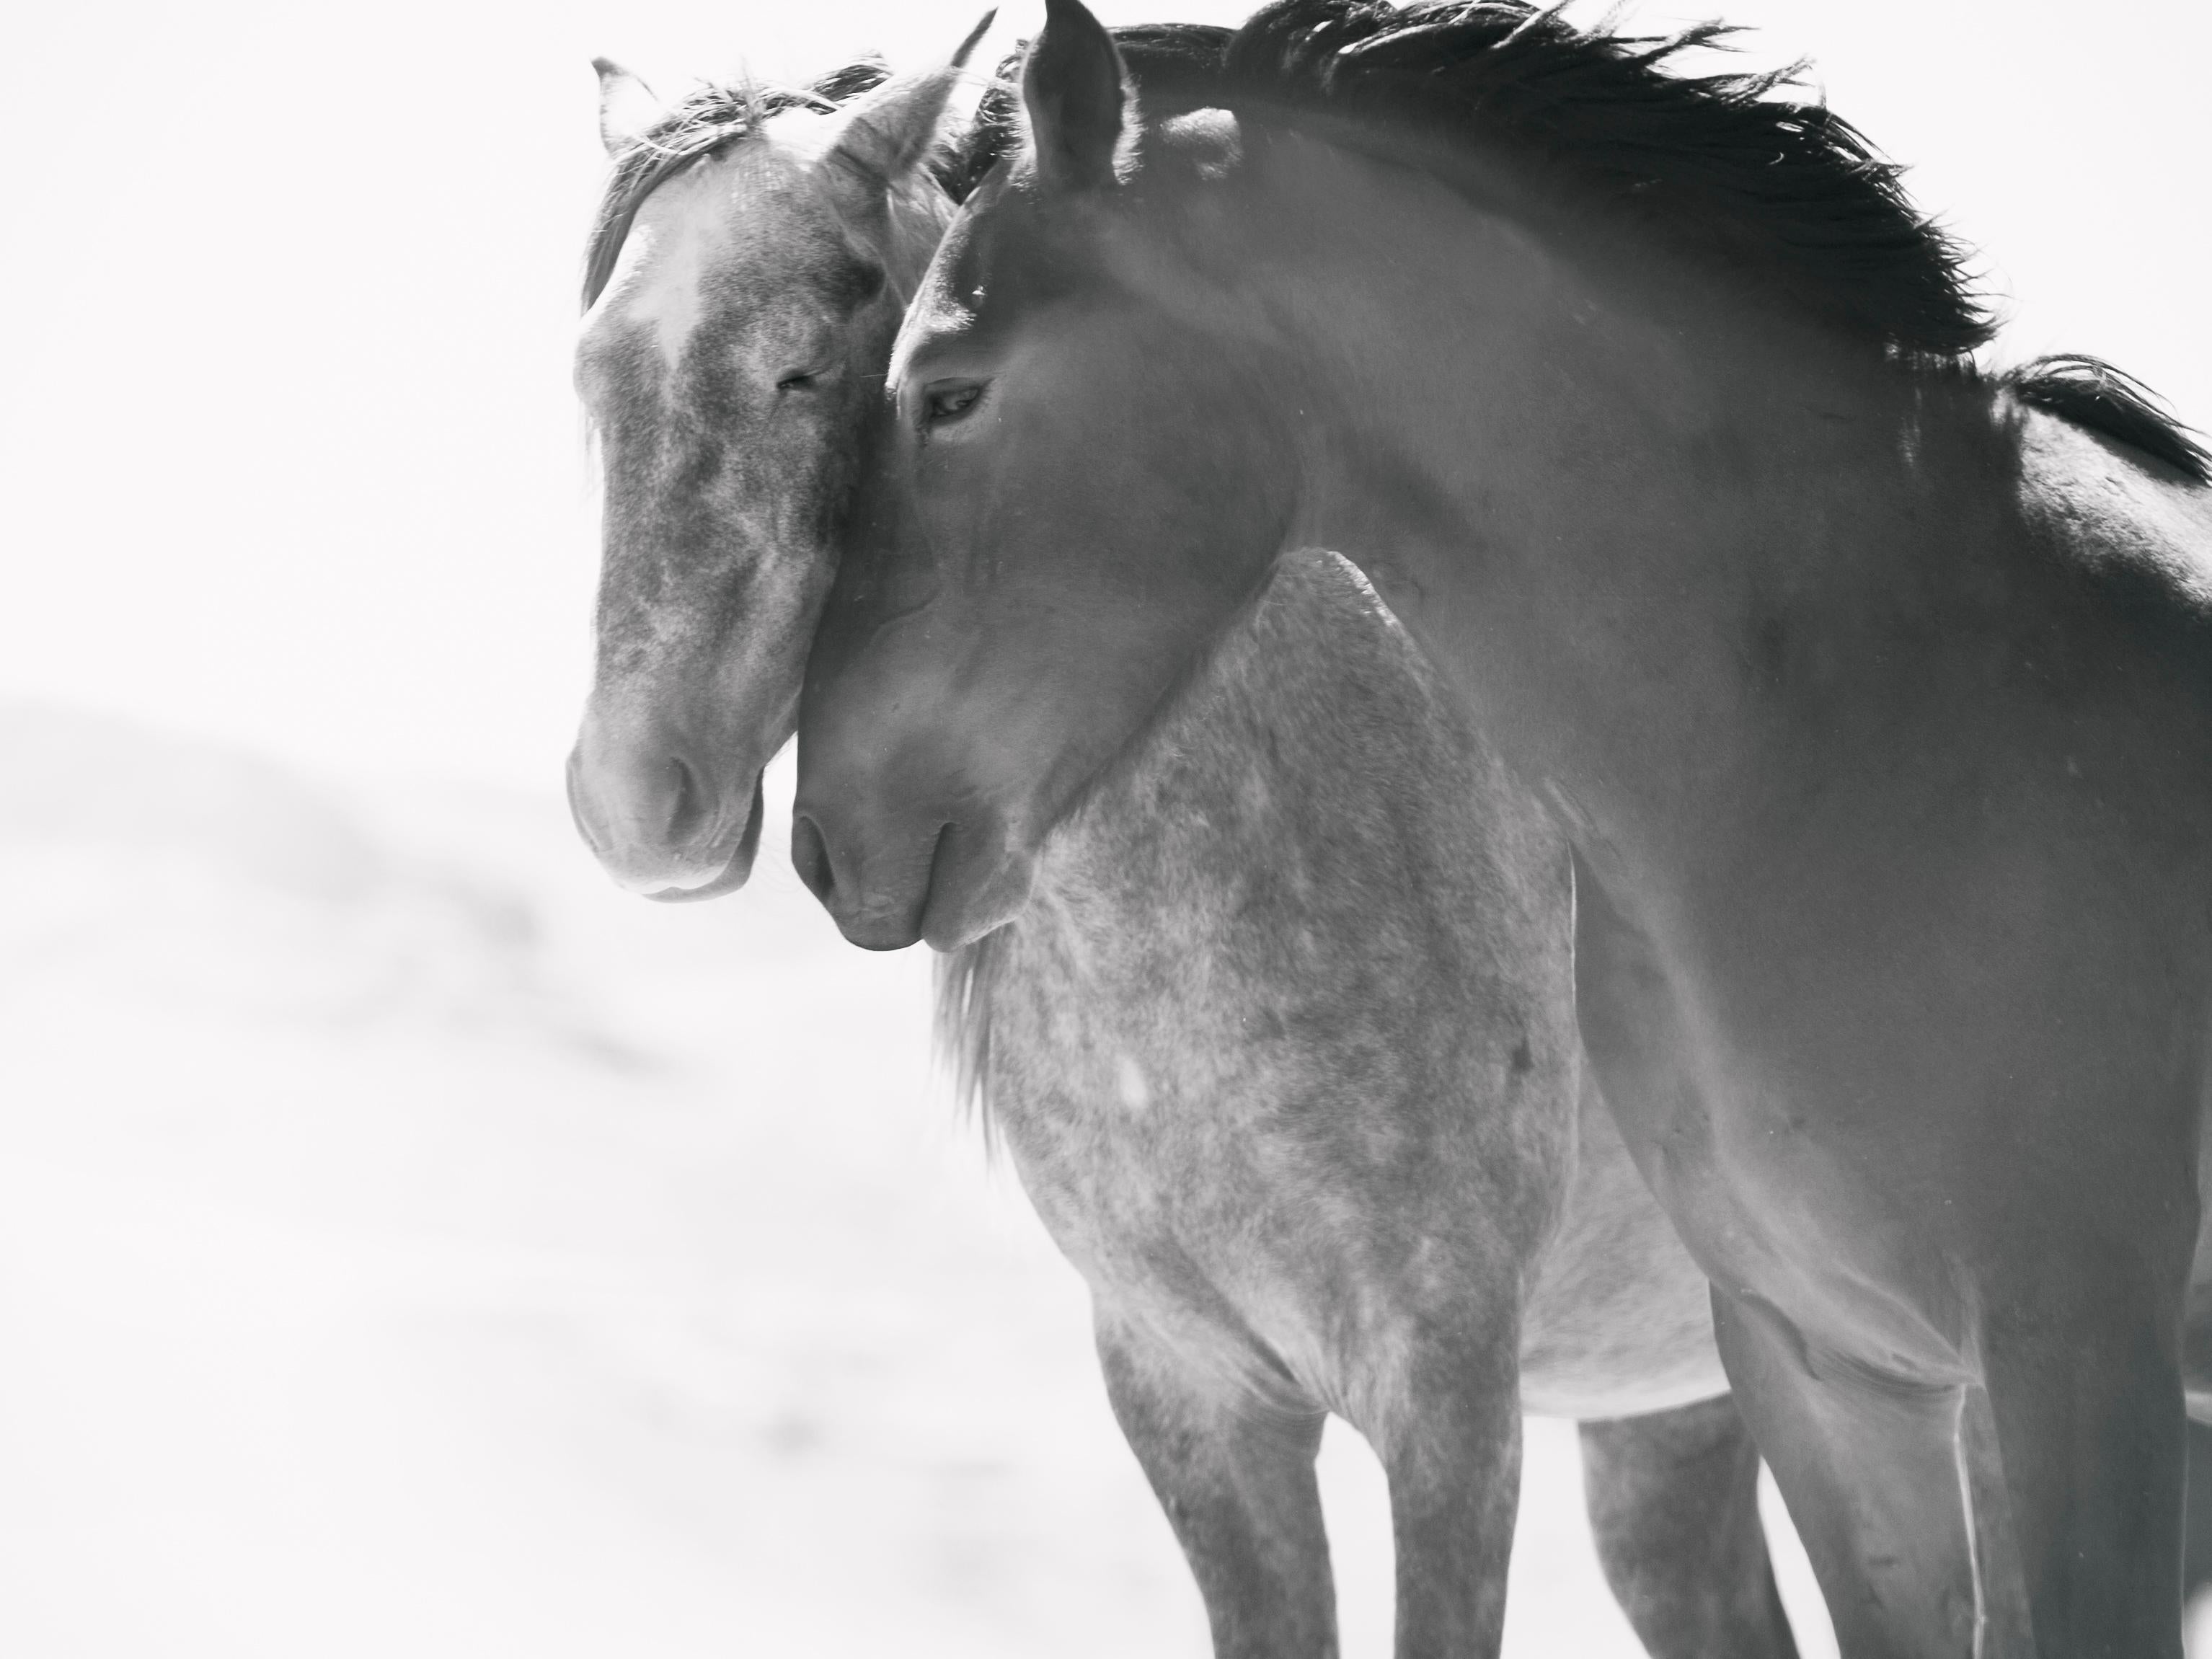 Shane Russeck Black and White Photograph - Soulmates 36x48 - Photography of Wild Horses Mustangs Photograph Unsinged Print